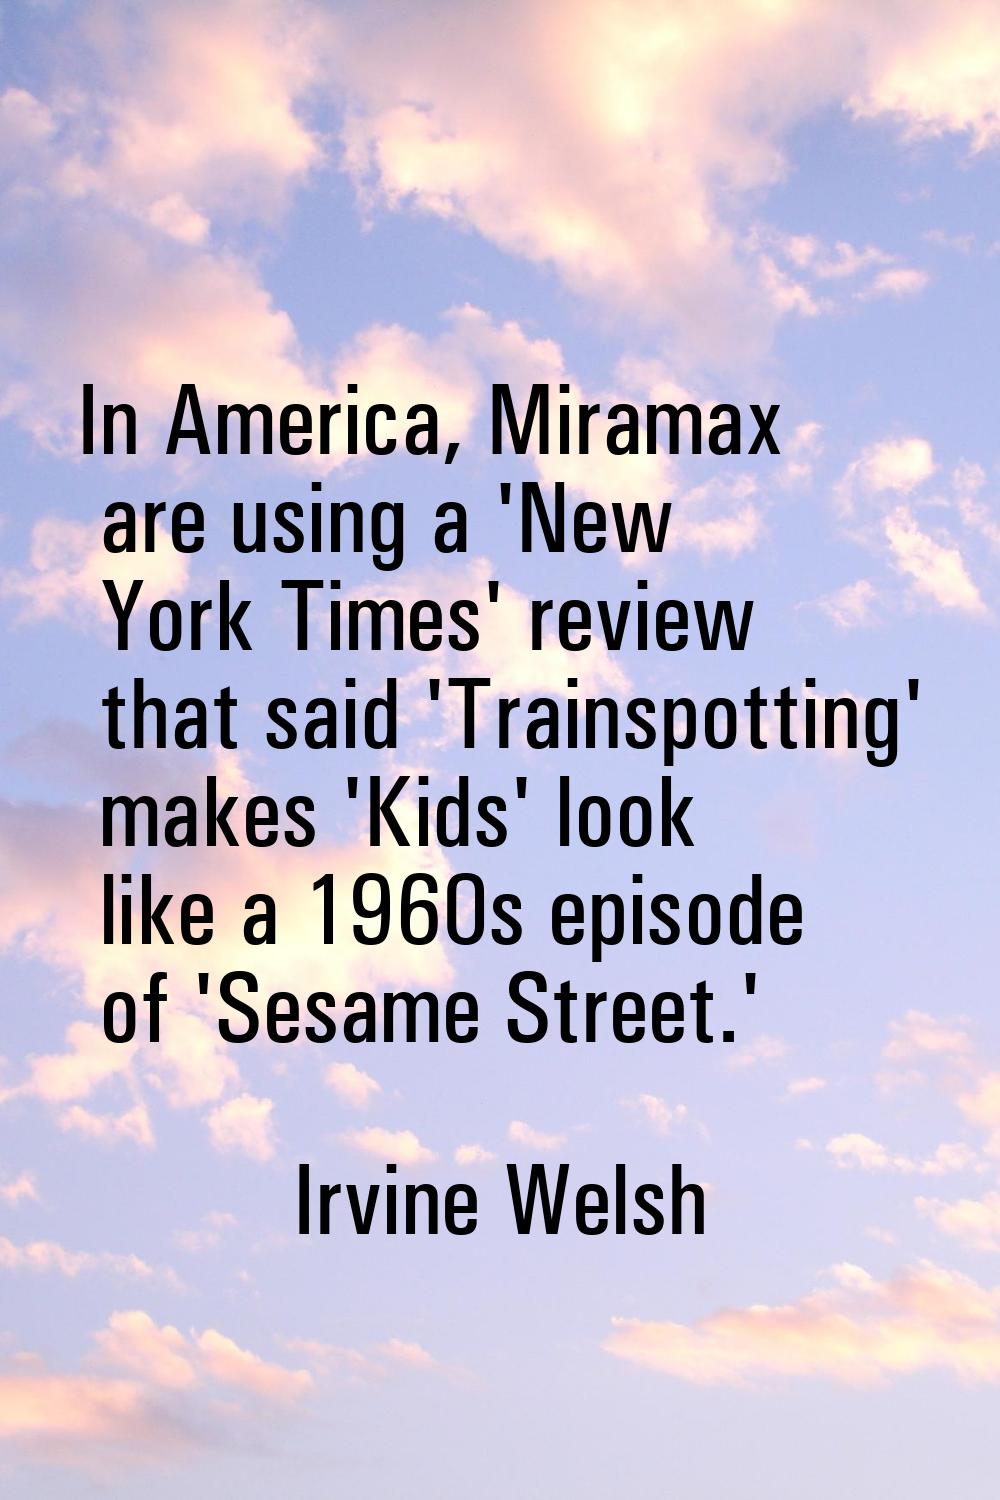 In America, Miramax are using a 'New York Times' review that said 'Trainspotting' makes 'Kids' look